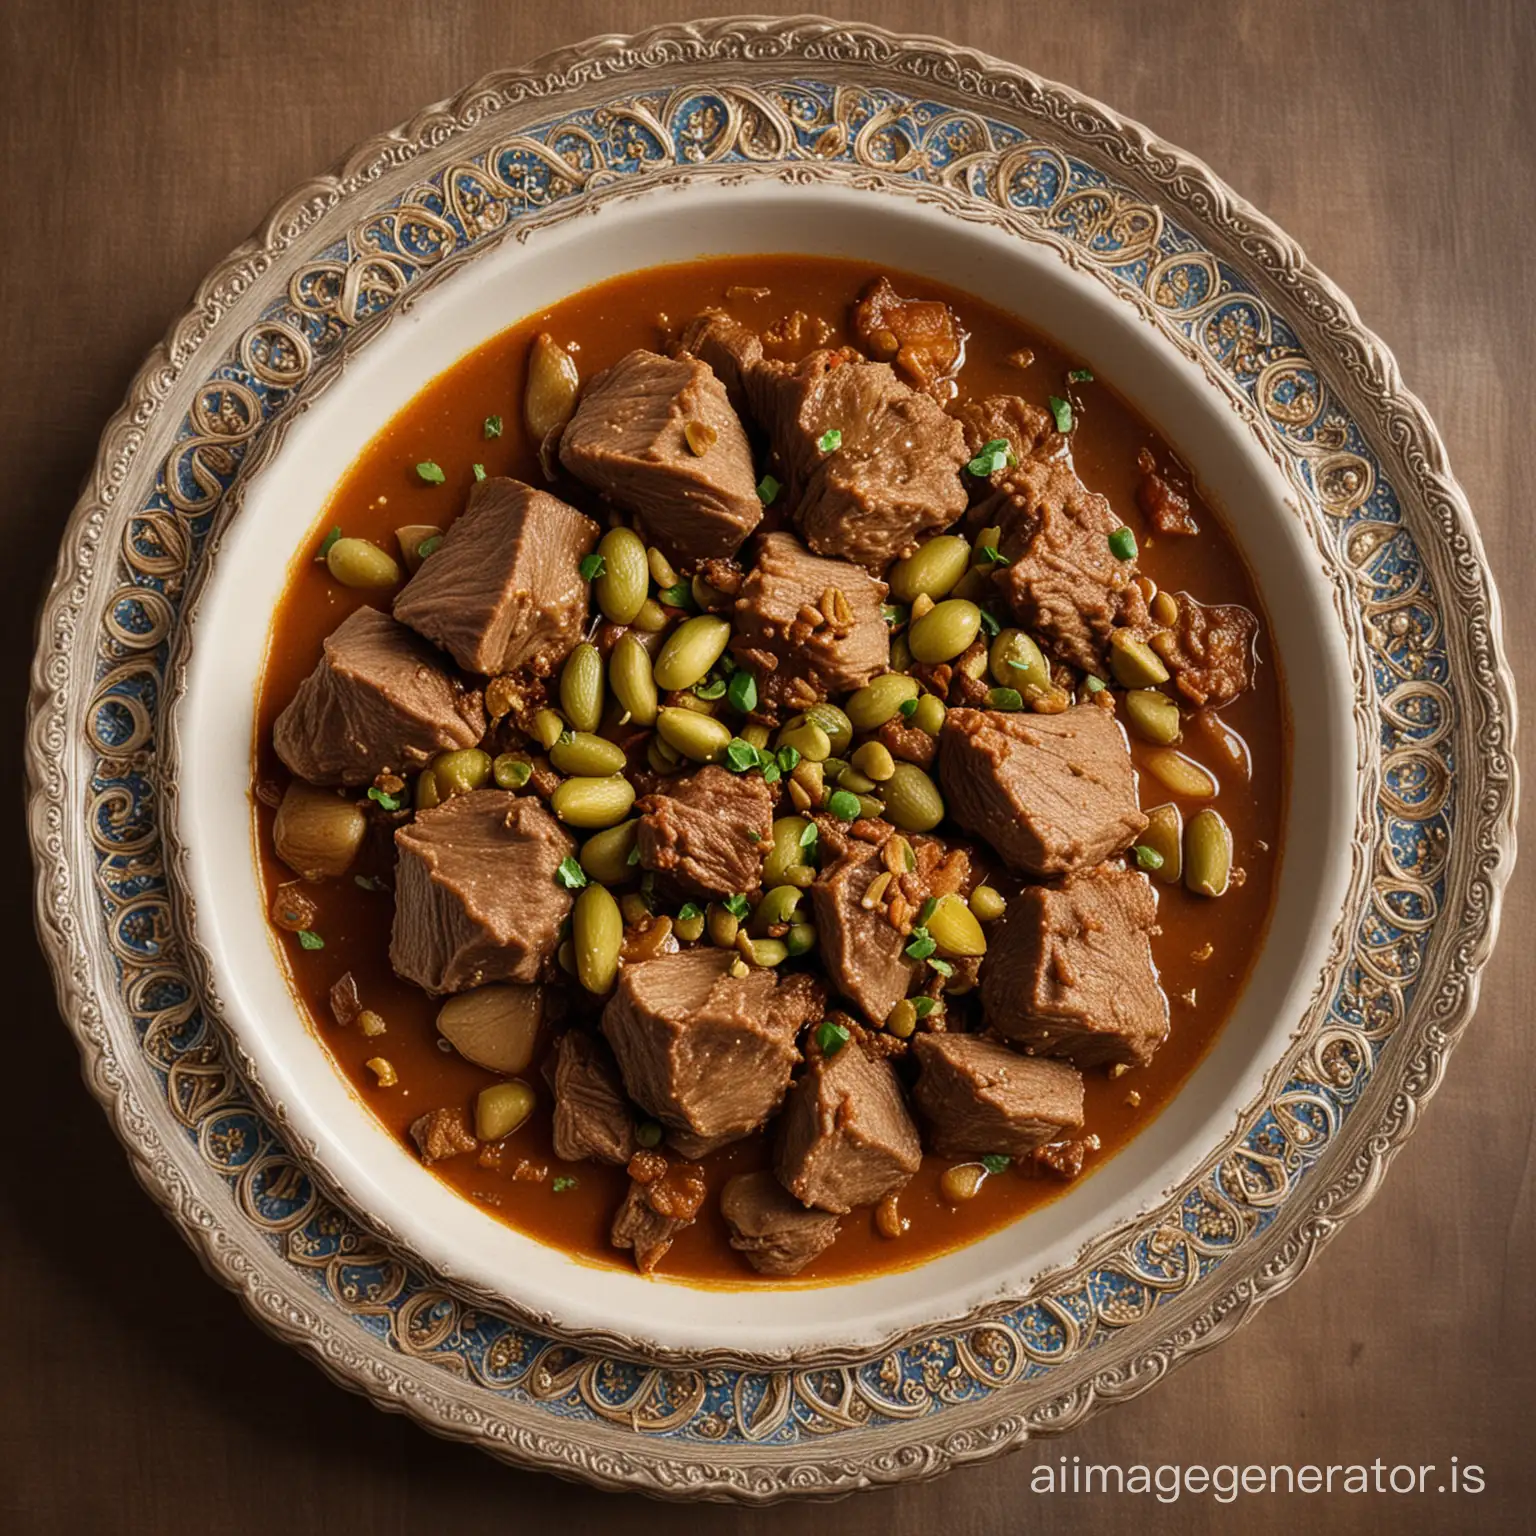 : Kerman might resemble "Roghani," a luxurious lamb stew cooked with saffron, pistachios, and a medley of aromatic spices, resulting in a rich and complex flavor profile. Like Kerman, Roghani exudes warmth and hospitality, with its generous use of spices and indulgent ingredients.